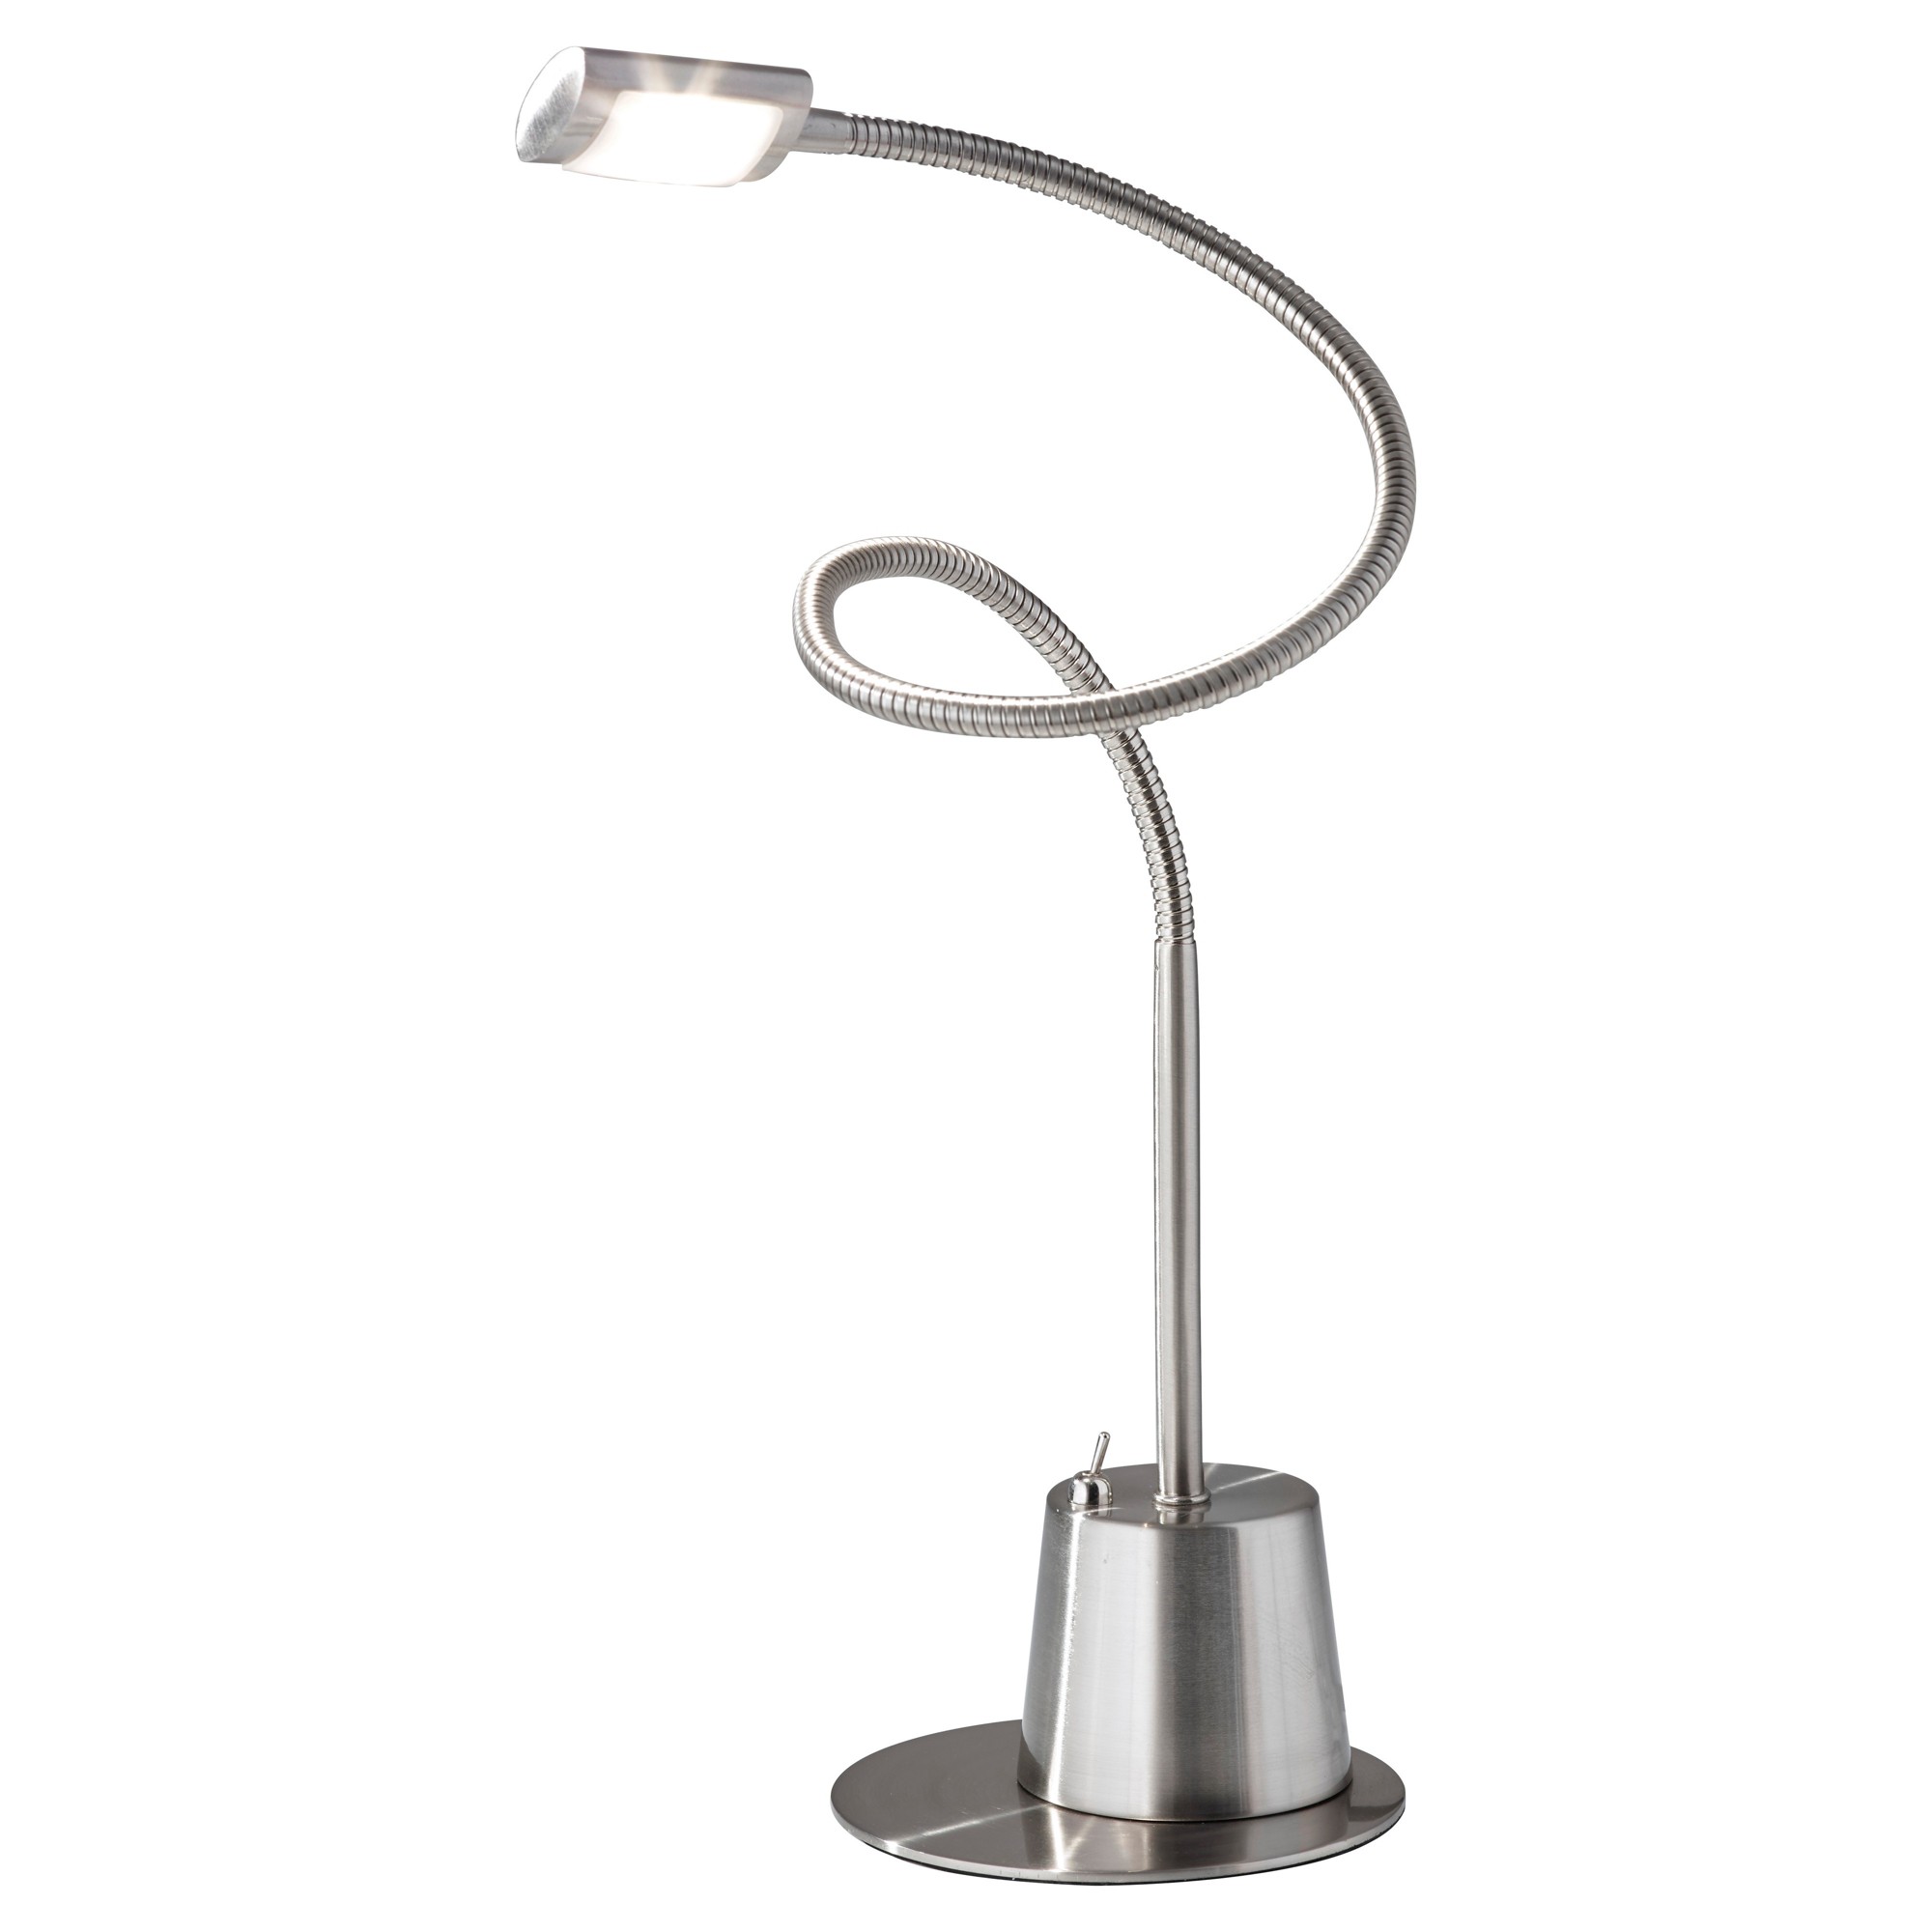 Adesso Eternity LED Extendible Gooseneck Lamp - Silver (Lamp Only)